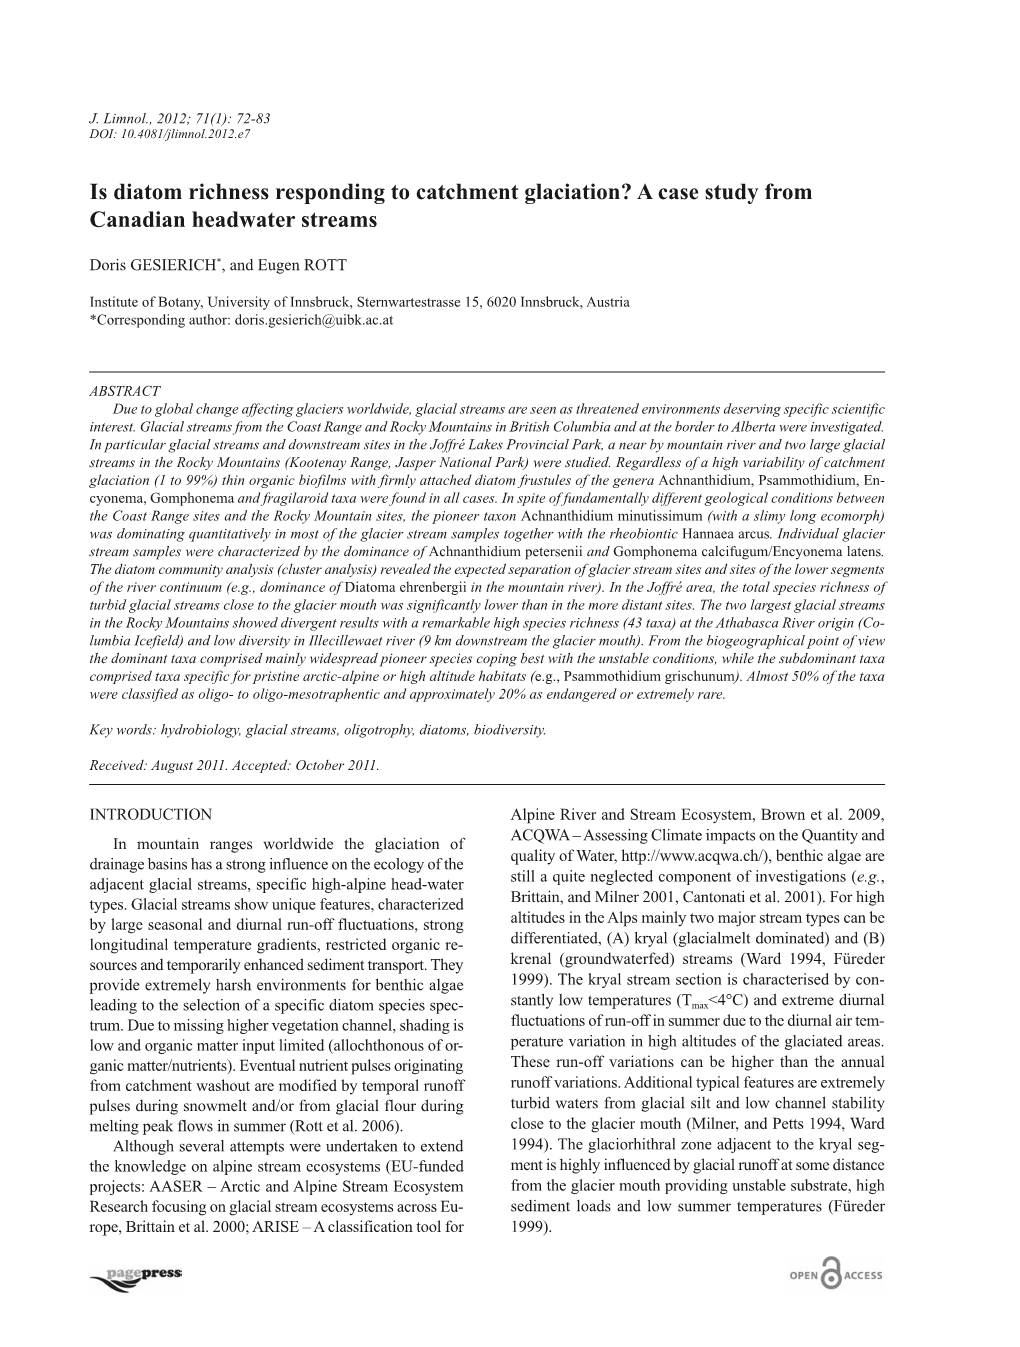 Is Diatom Richness Responding to Catchment Glaciation? a Case Study from Canadian Headwater Streams